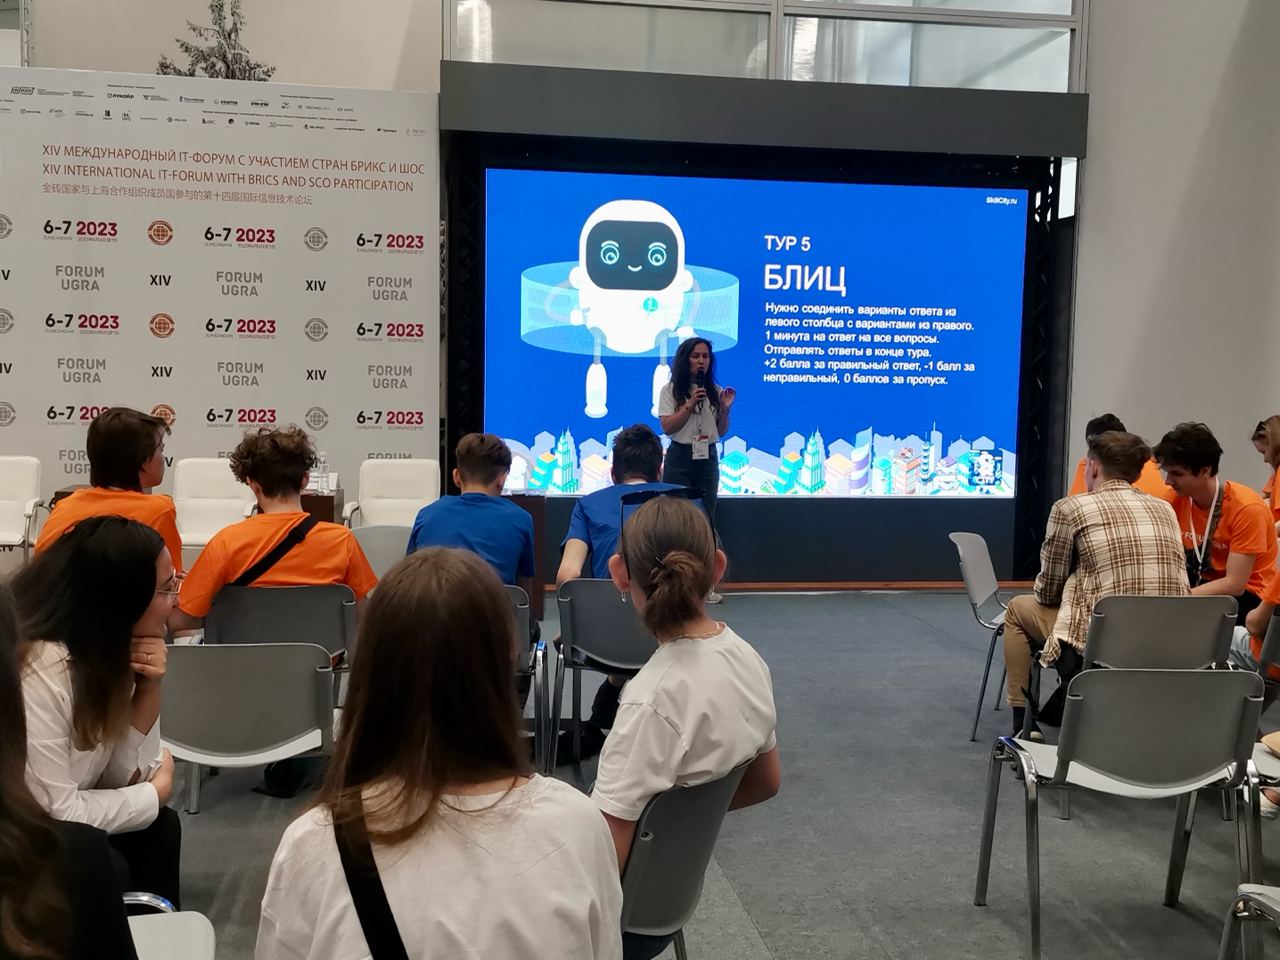 In Khanty-Mansiysk Autonomous Okrug - Yugra the Center and the Alliance organized an intensive course on children's safety in the digital environment